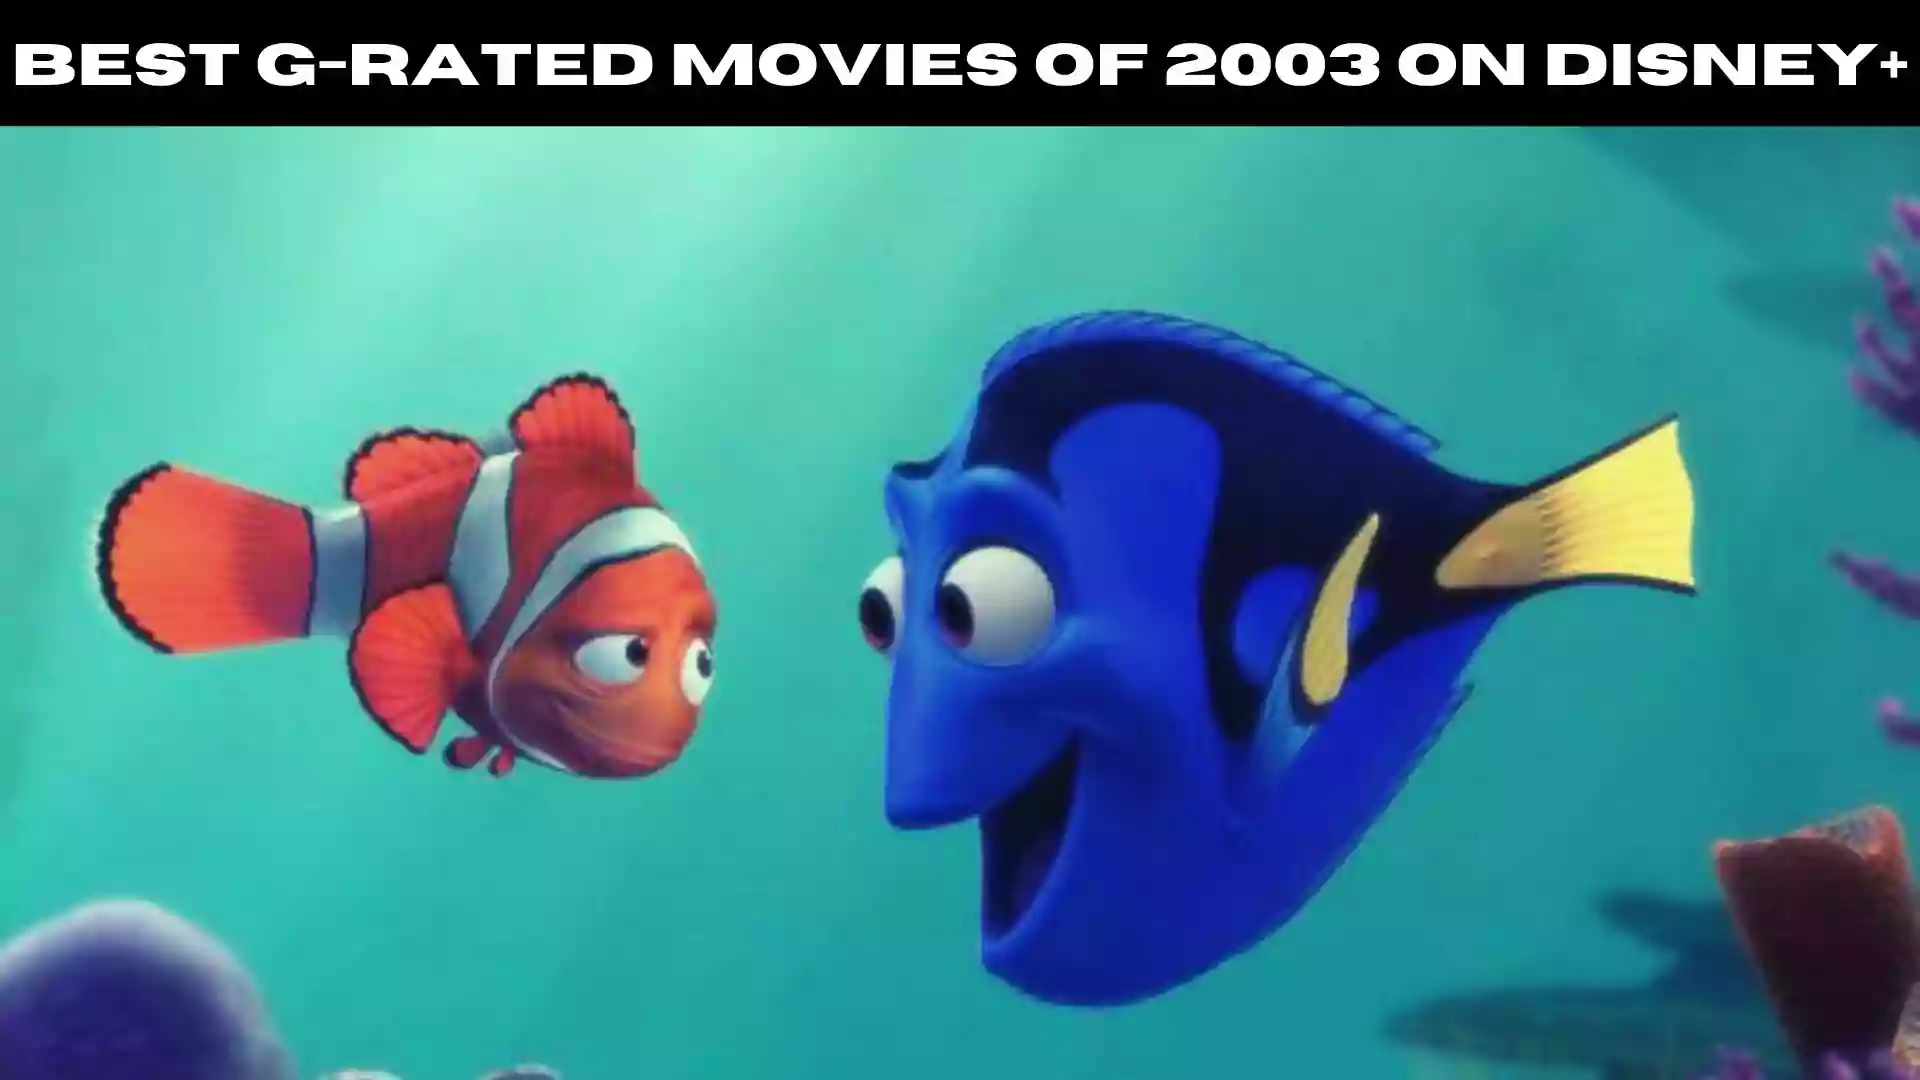 Best G-Rated Movies of 2003 on Disney+